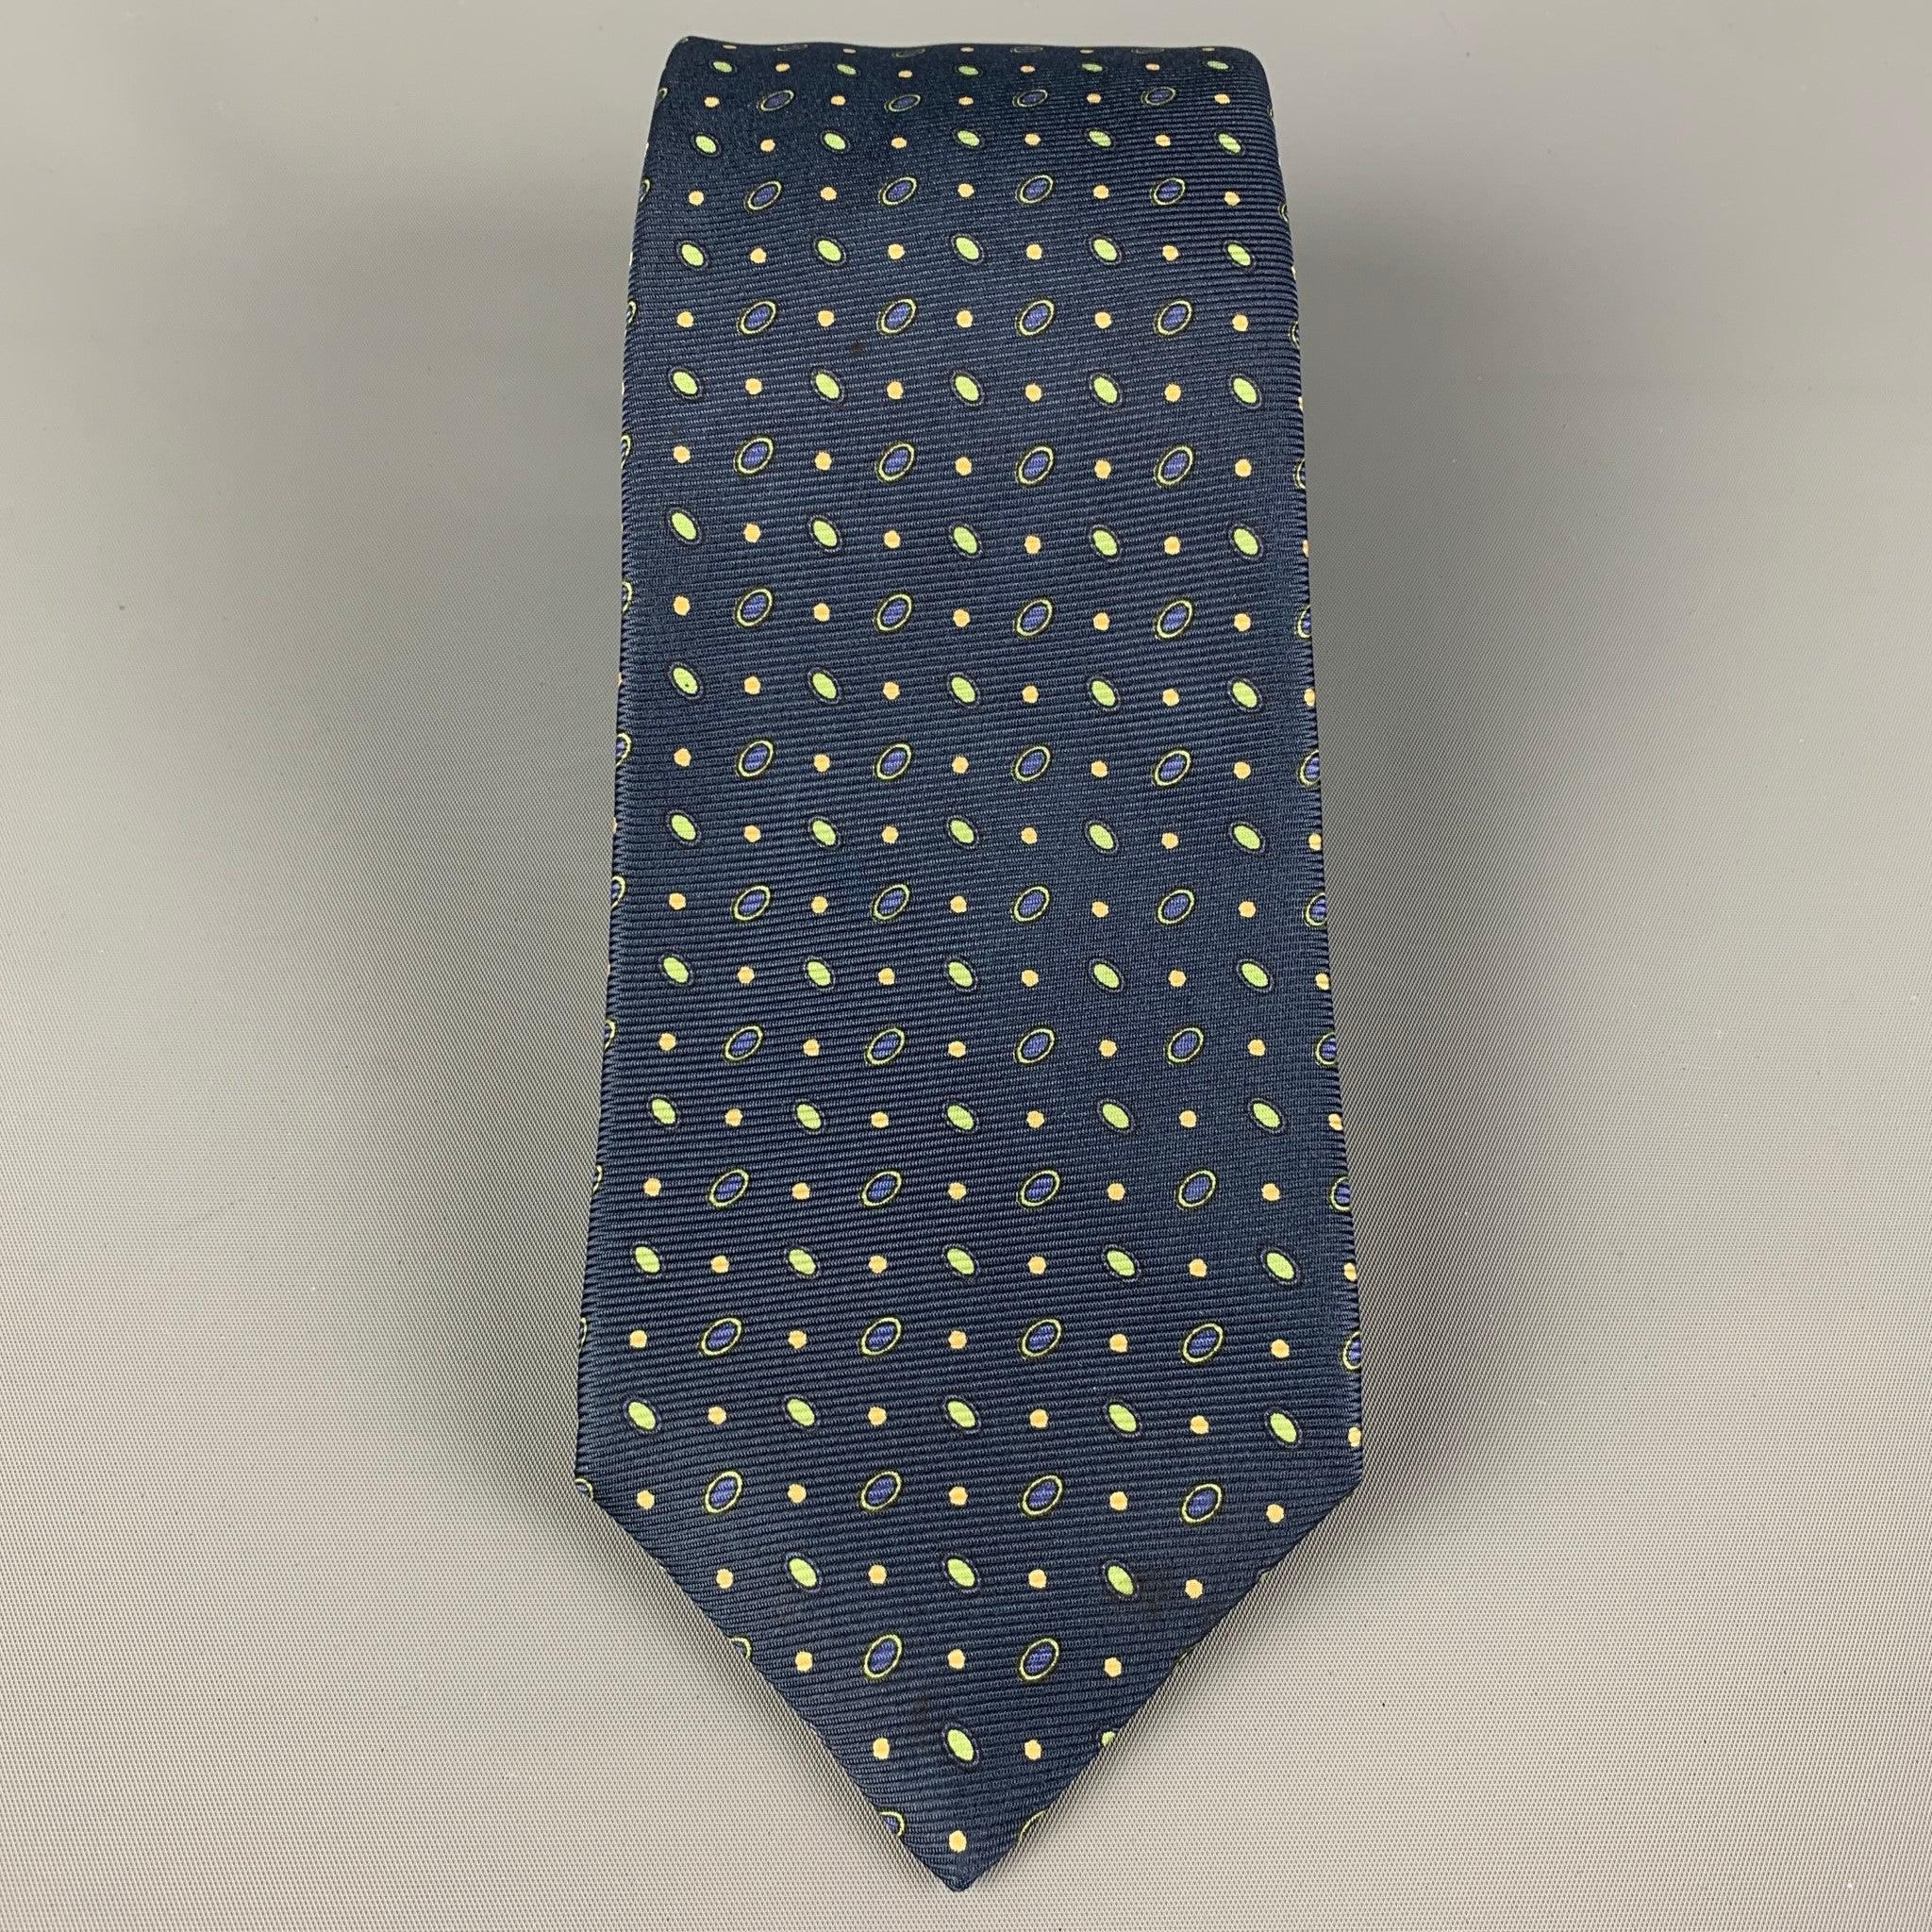 KITON necktie comes in a navy & green silk with a all over dot print. Made in Italy . Very Good Pre-Owned Condition. Width: 3.75 inches  Length: 62 inches 


  
  
 
Reference: 120385
Category: Tie
More Details
    
Brand:  KITON
Color:  Navy &